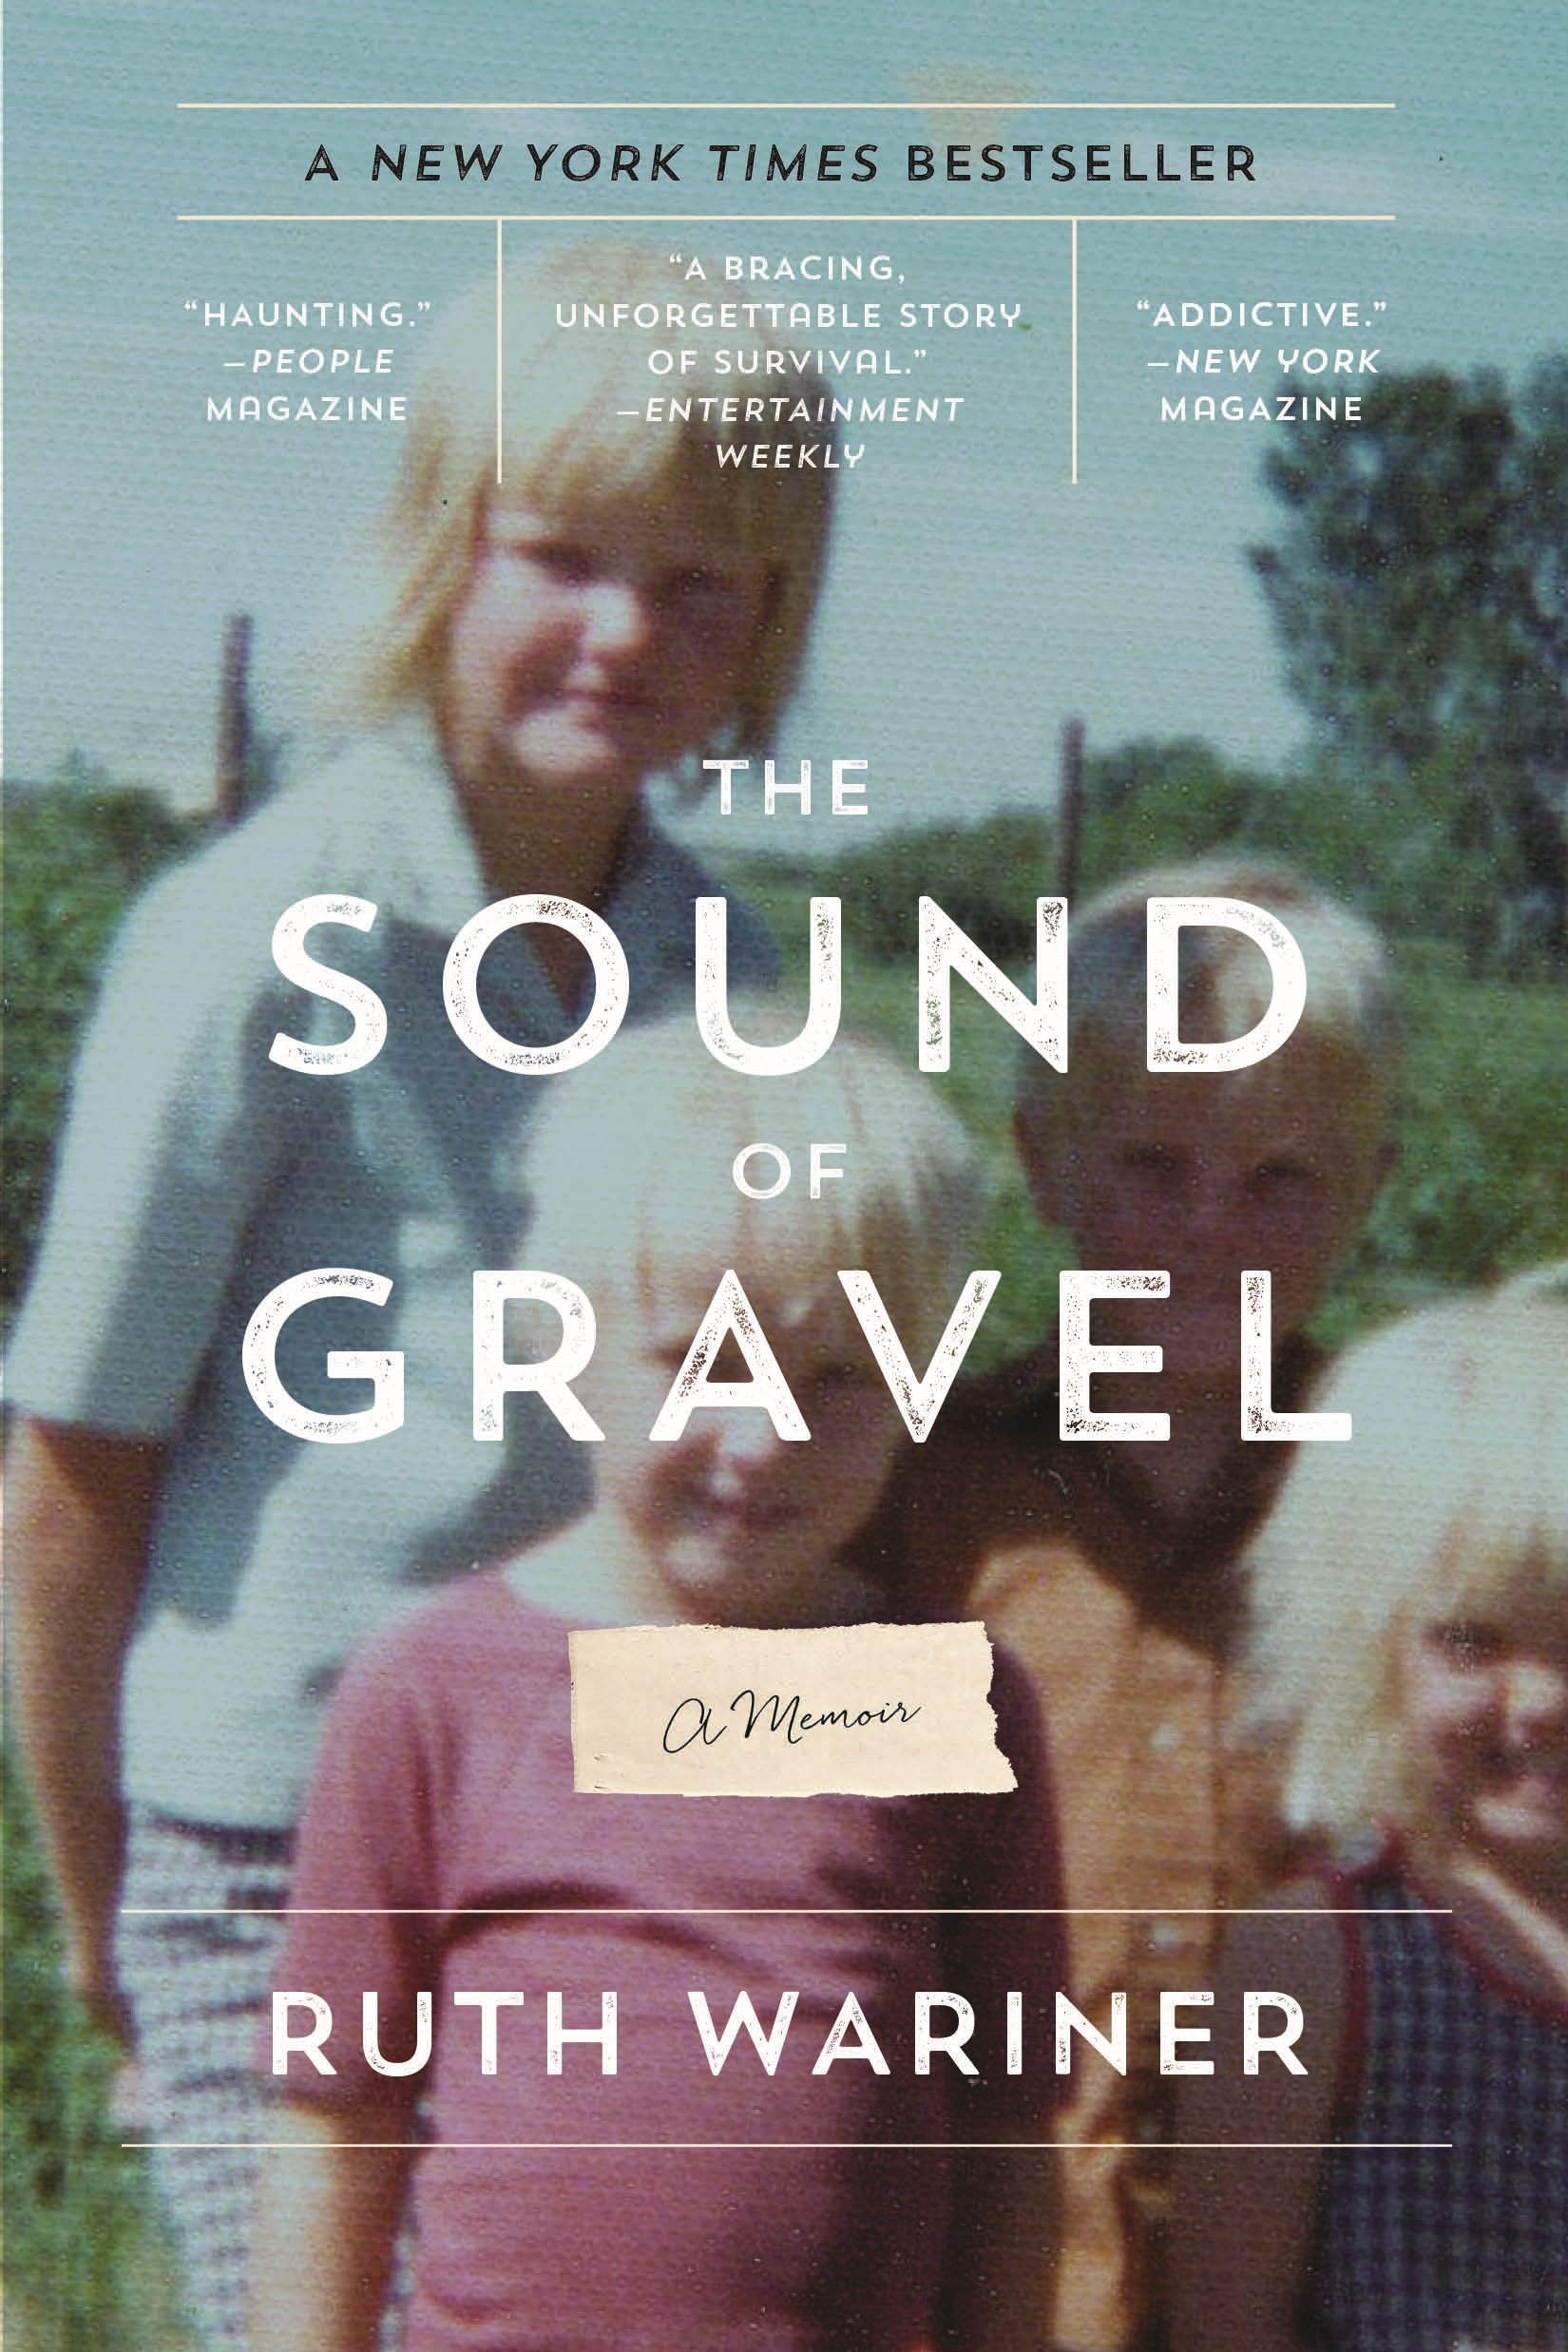 The Sound of Gravel by Ruth Wariner